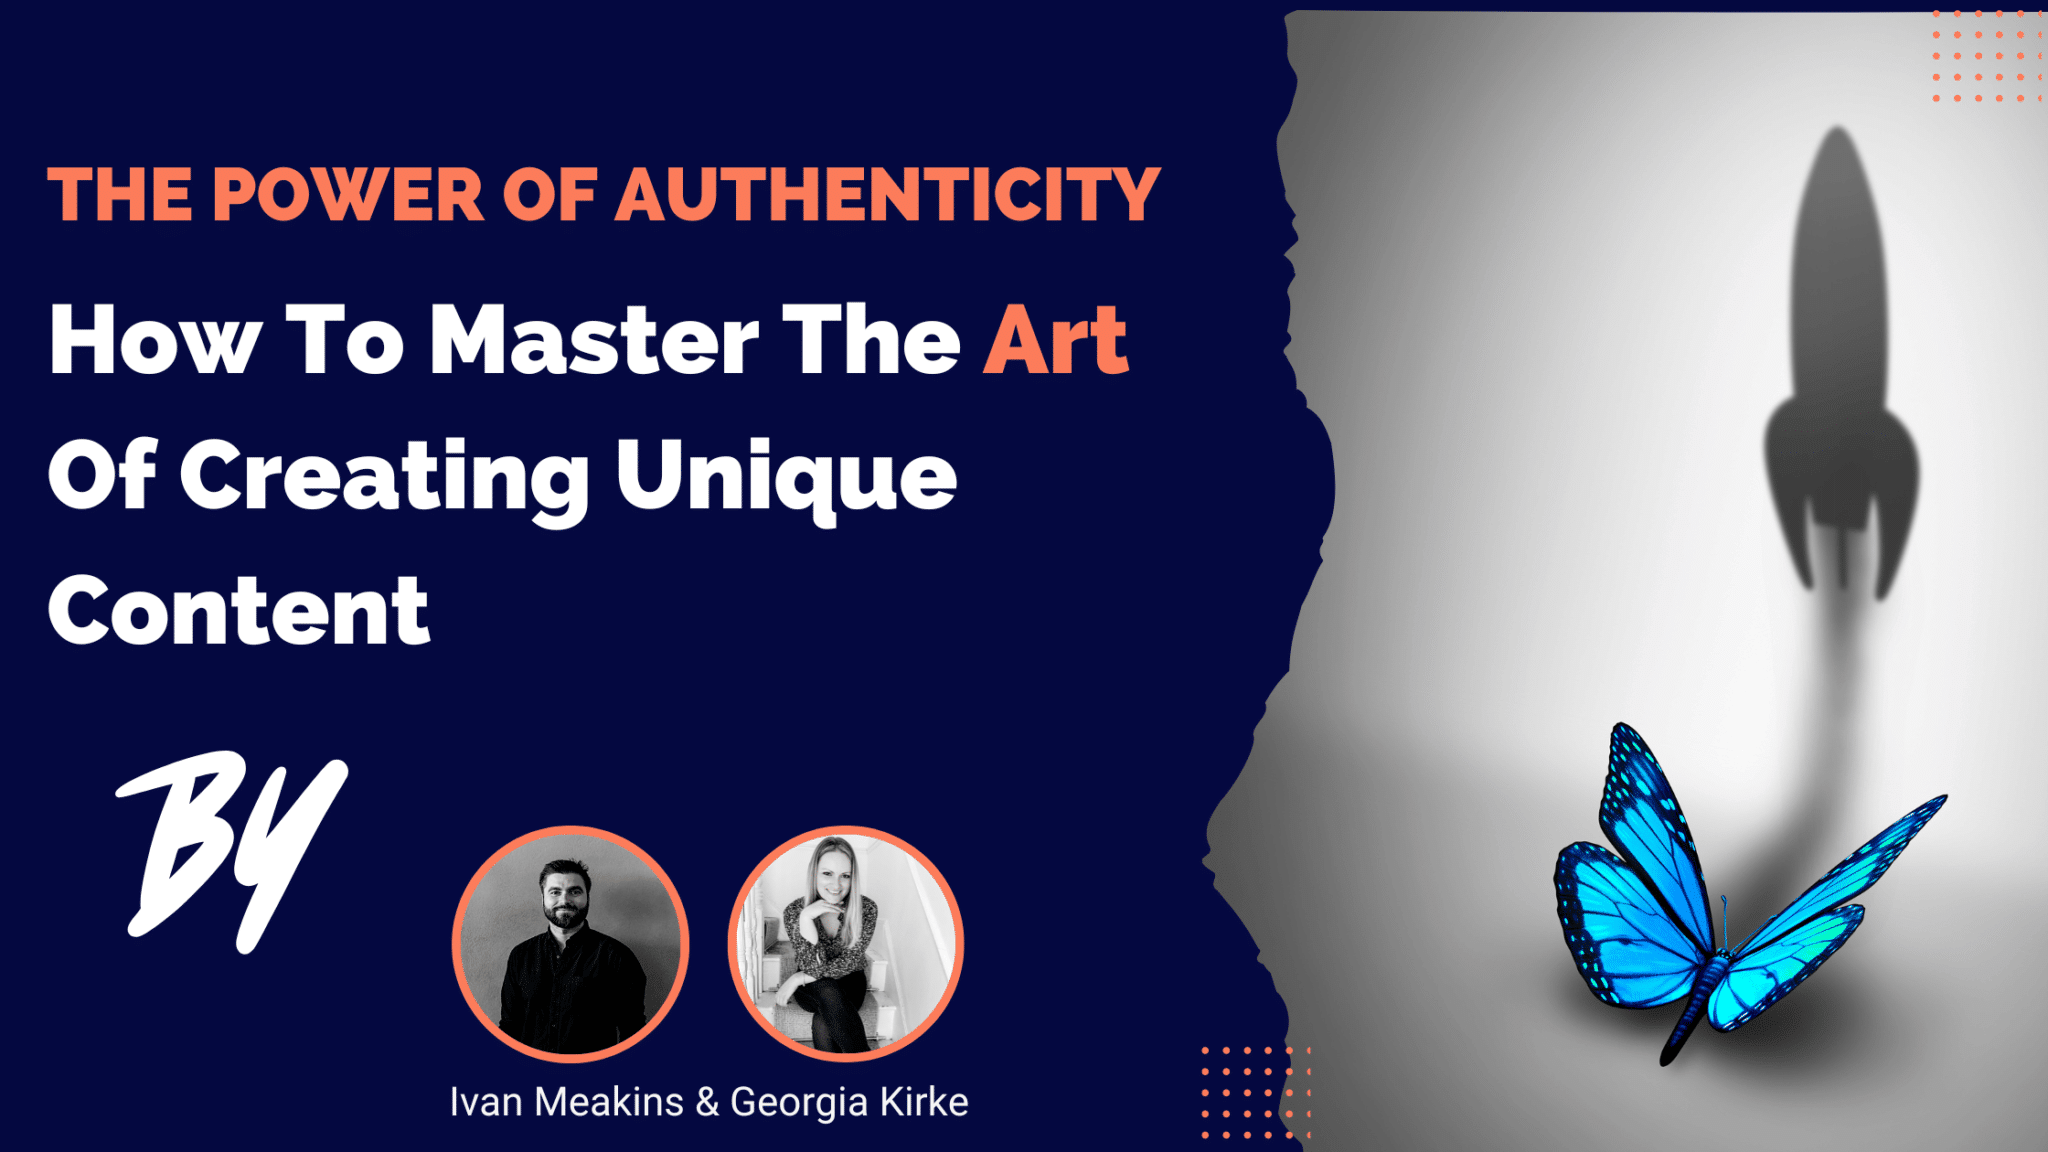 The Power Of Authenticity: How To Master The Art Of Creating Unique Content